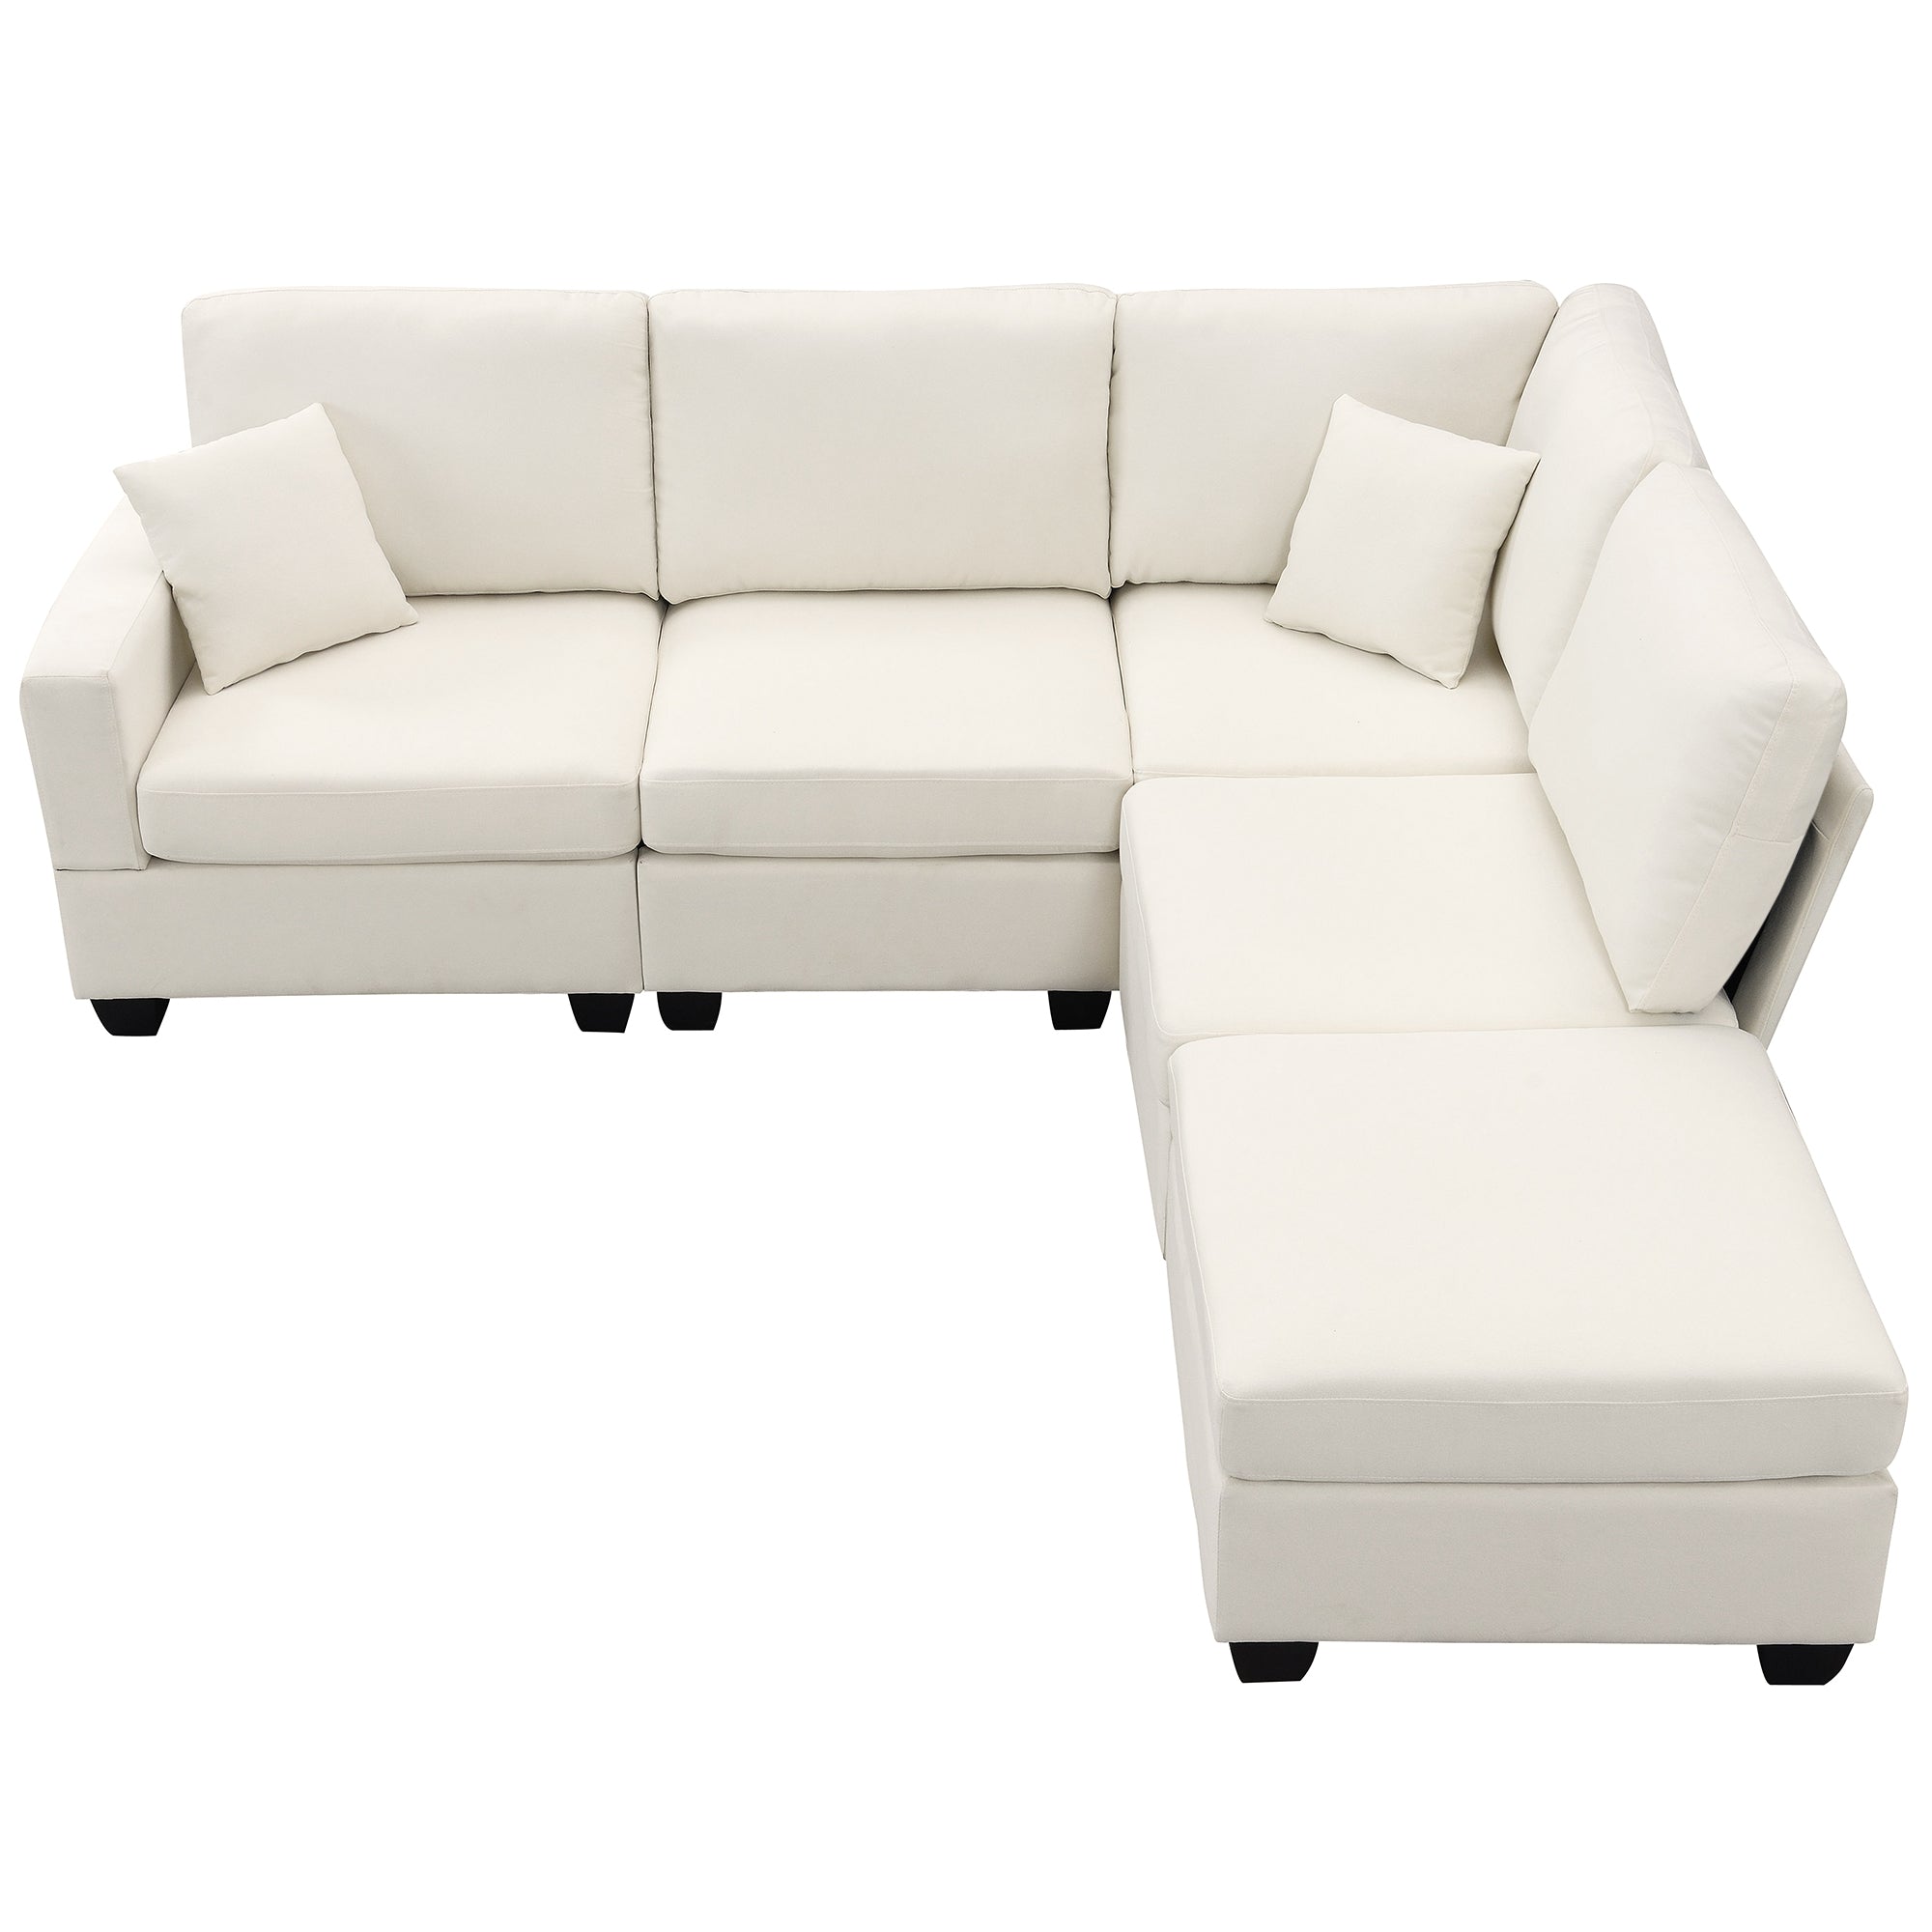 Bellemave 90" Modern L-Shape Sectional Sofa,5-Seat Modular Couch Set with Convertible Ottoman and 2 Pillows